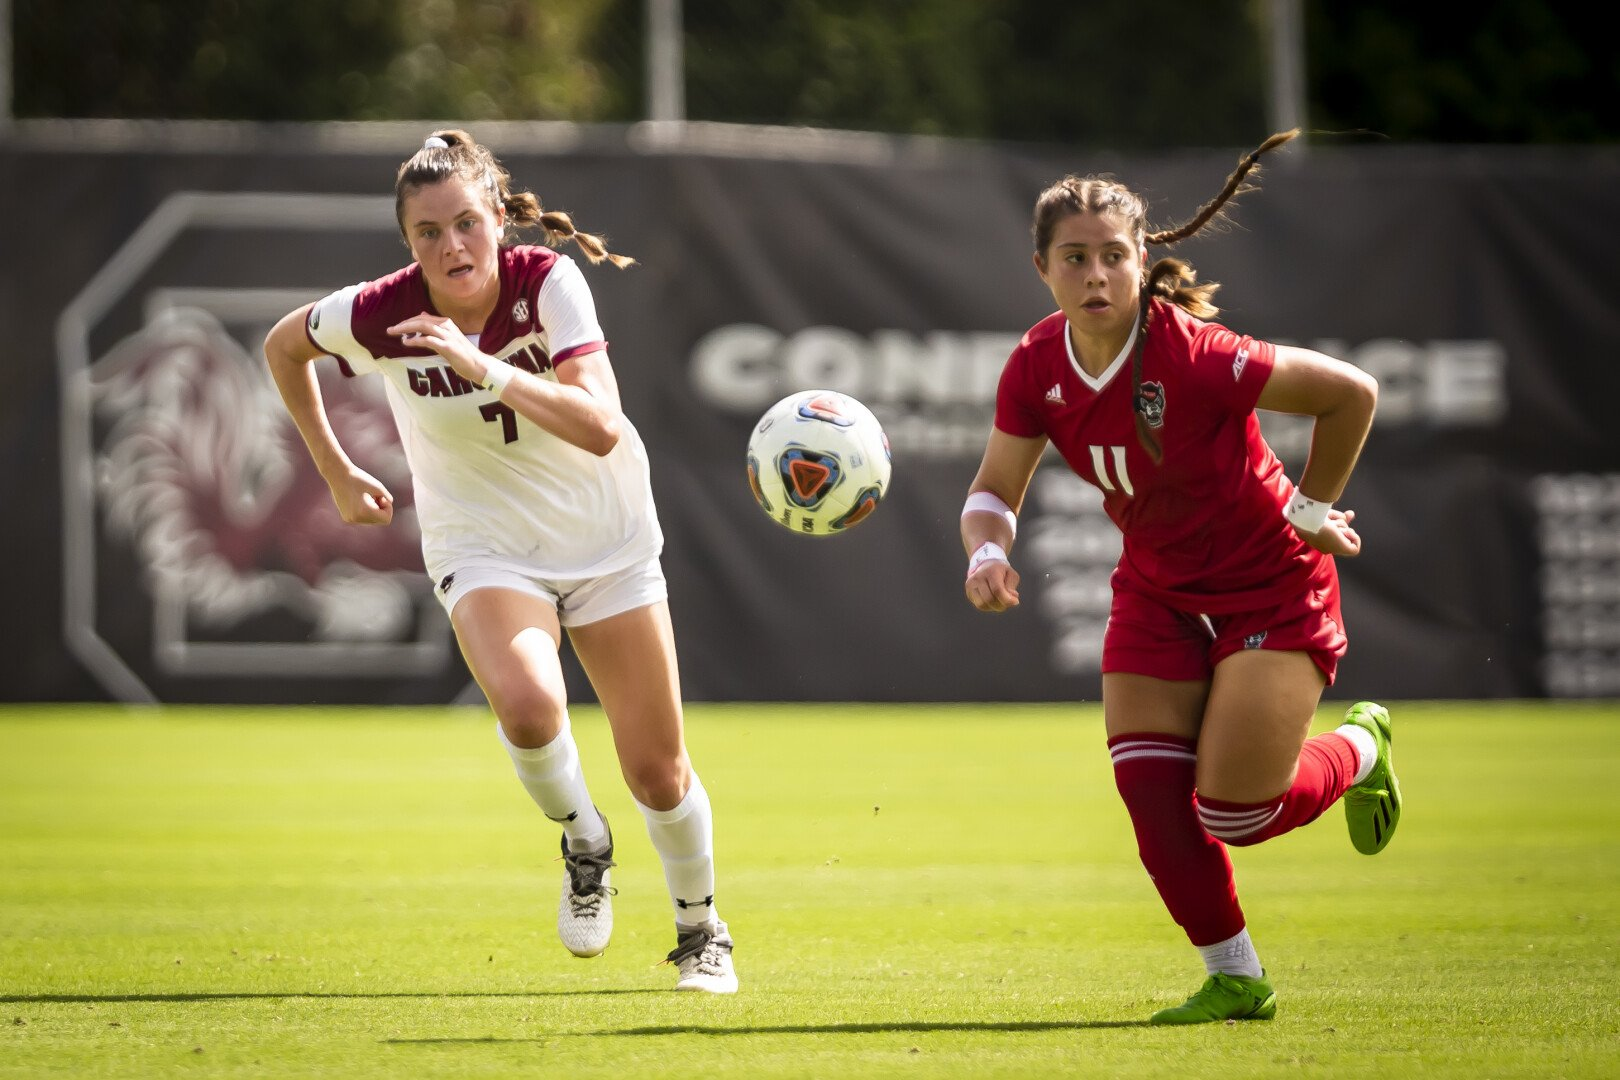 No. 5 Women's Soccer to Open Conference Play at No. 11 Alabama